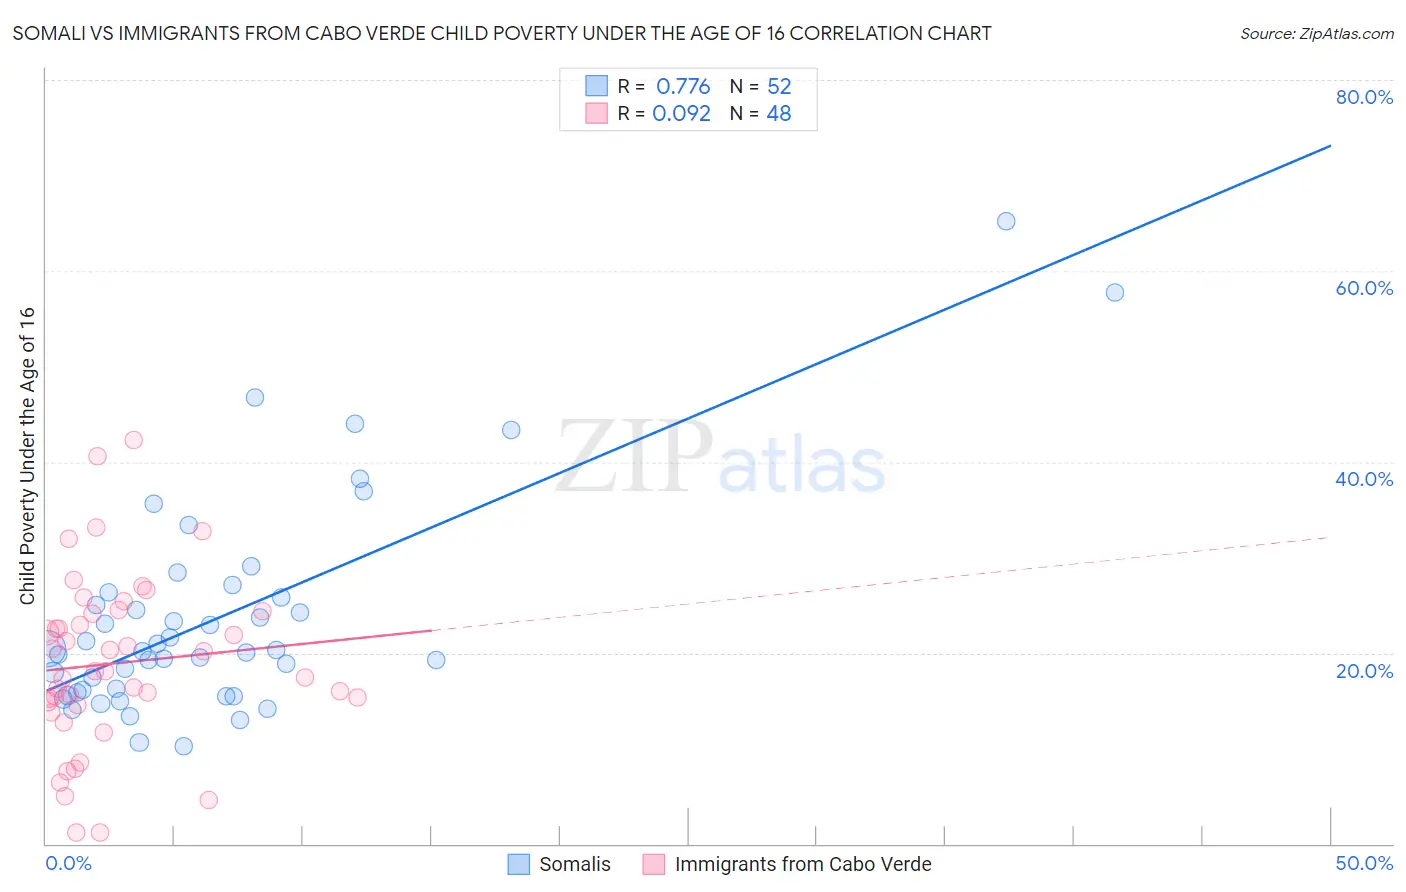 Somali vs Immigrants from Cabo Verde Child Poverty Under the Age of 16